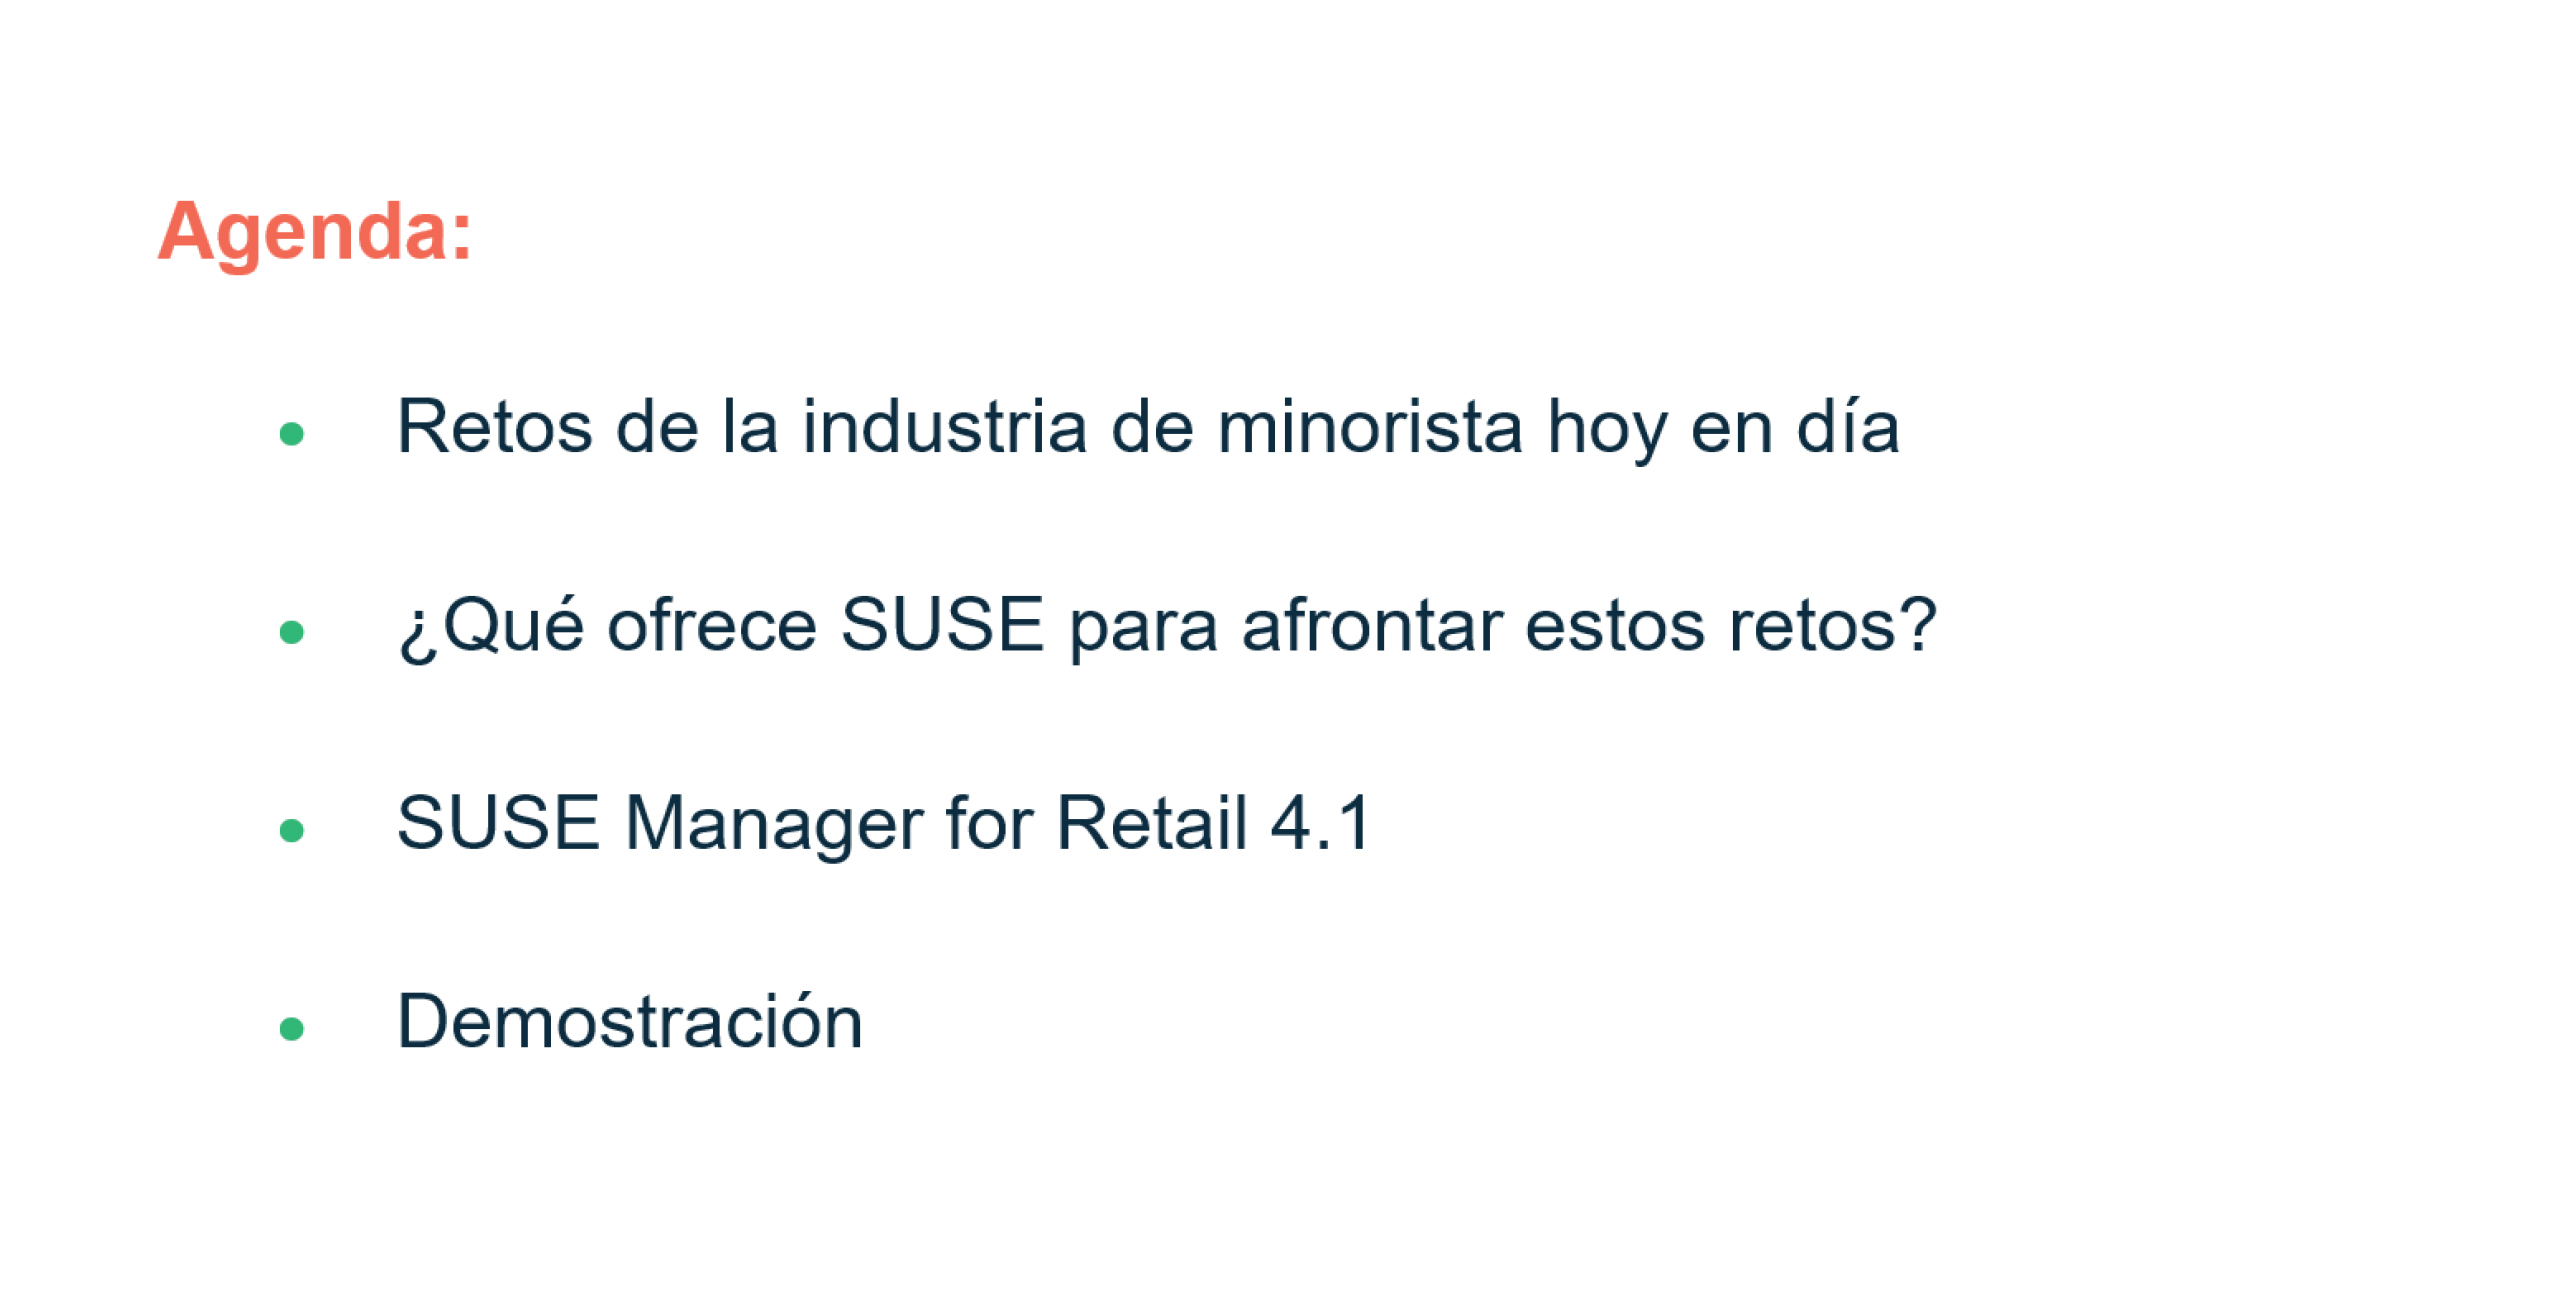 SUSE Manager for Retailevent